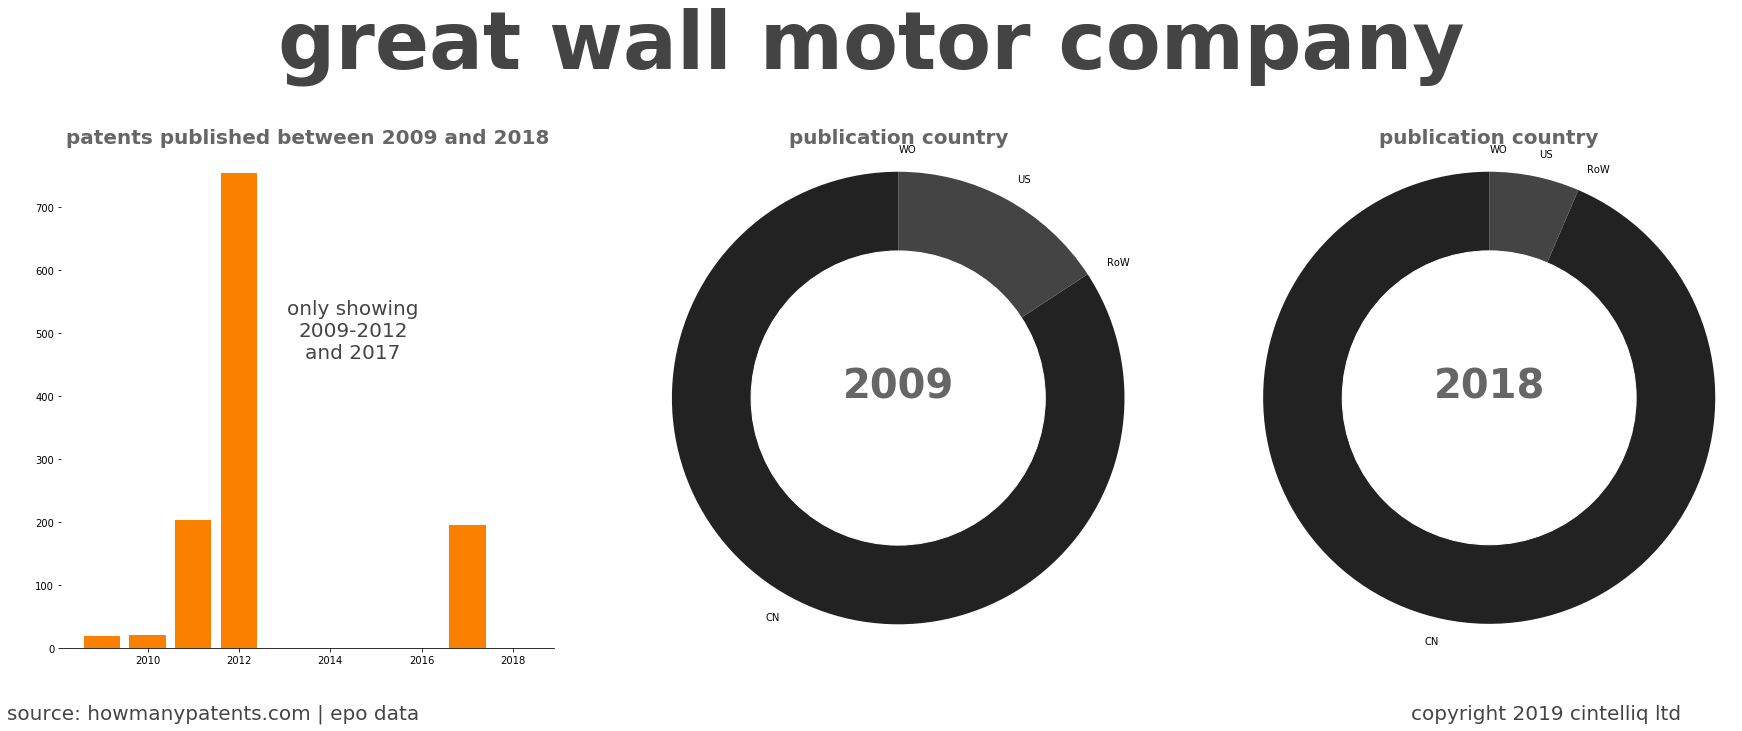 summary of patents for Great Wall Motor Company